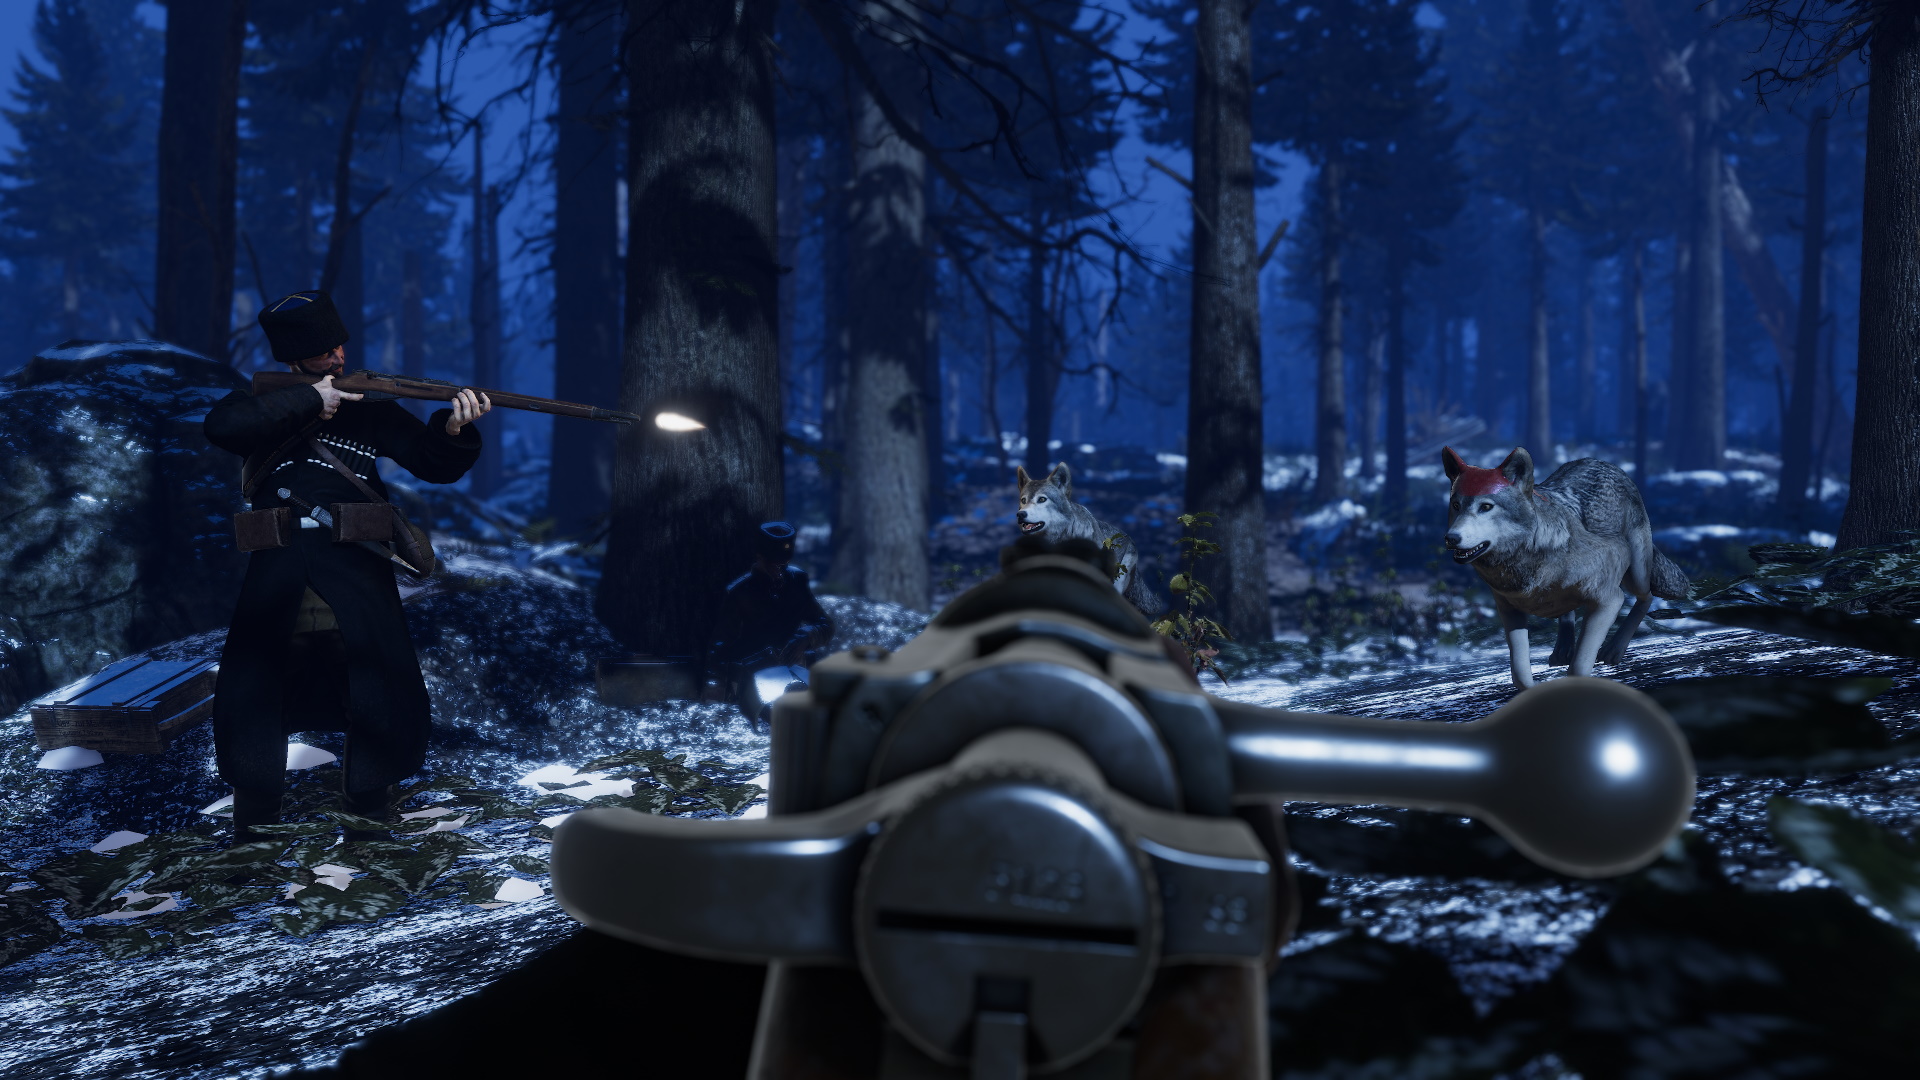 Soldiers firing at wolves in a dark forest.